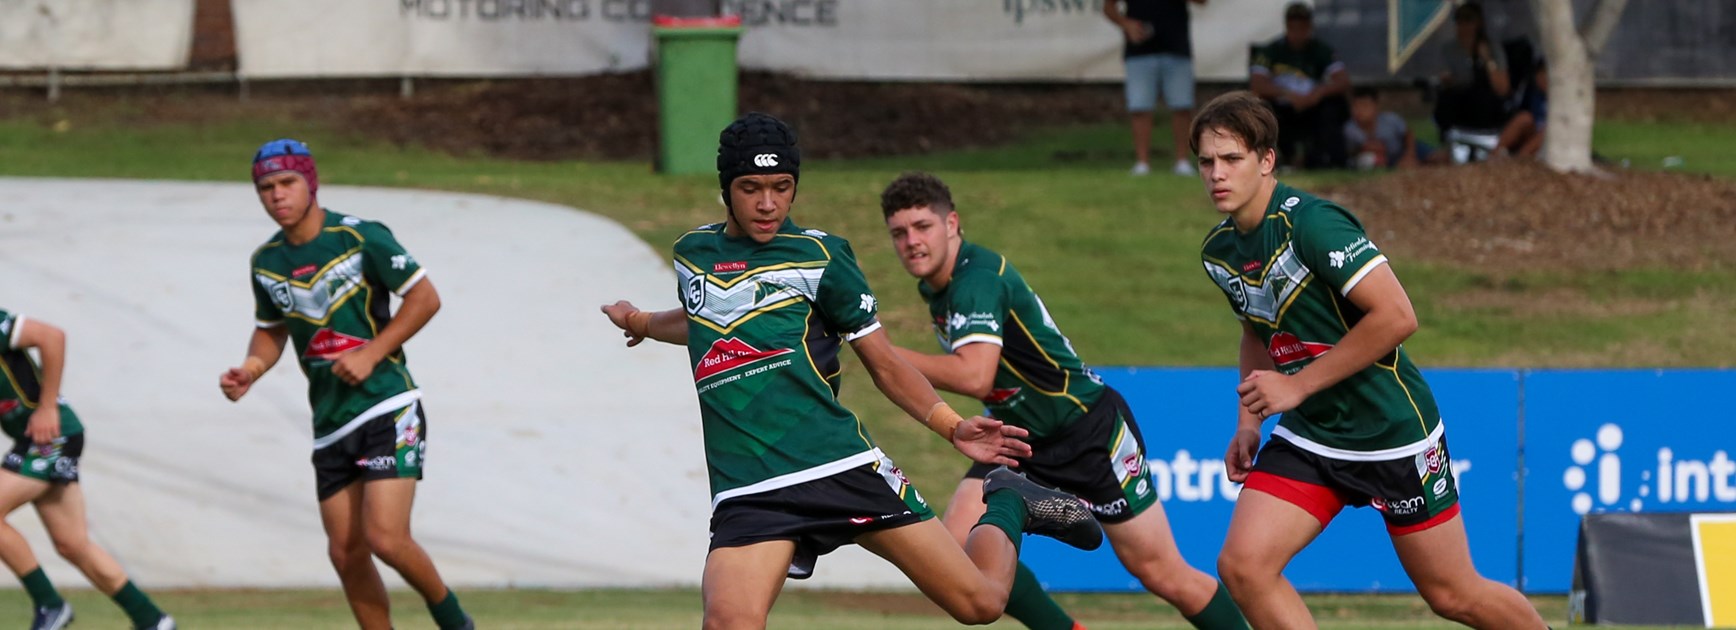 Falcons looking to strike against Jets in Kawana